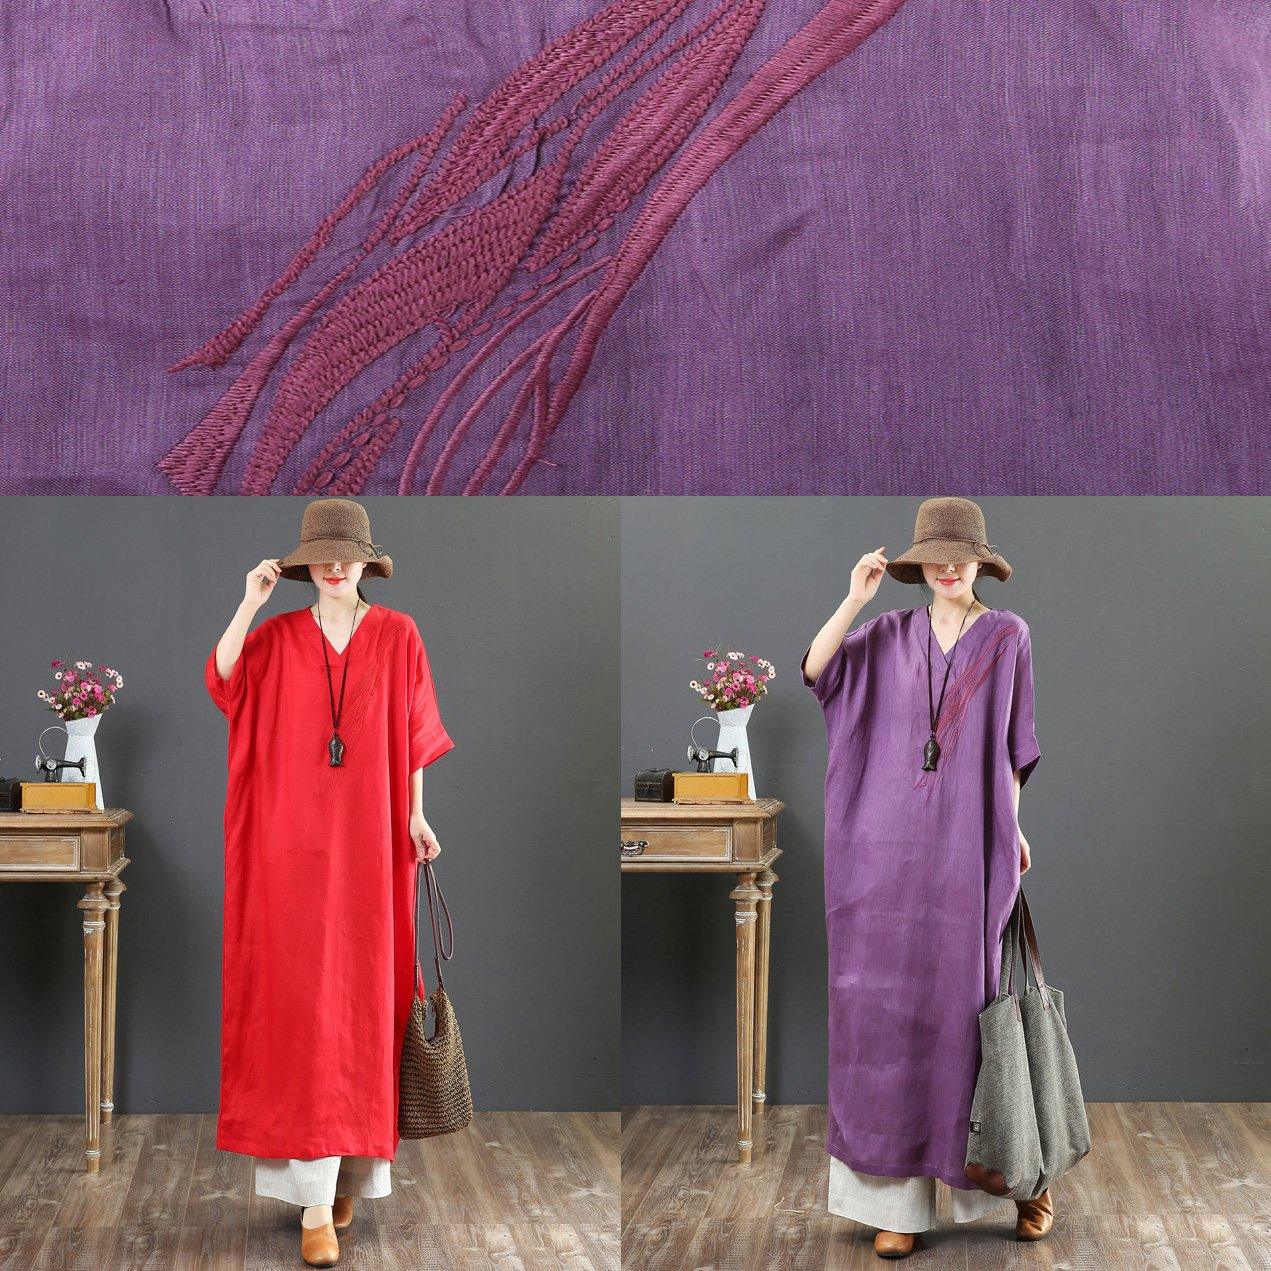 Bohemian red linen clothes Omychic Shirts v neck batwing sleeve long Summer Dress - Omychic